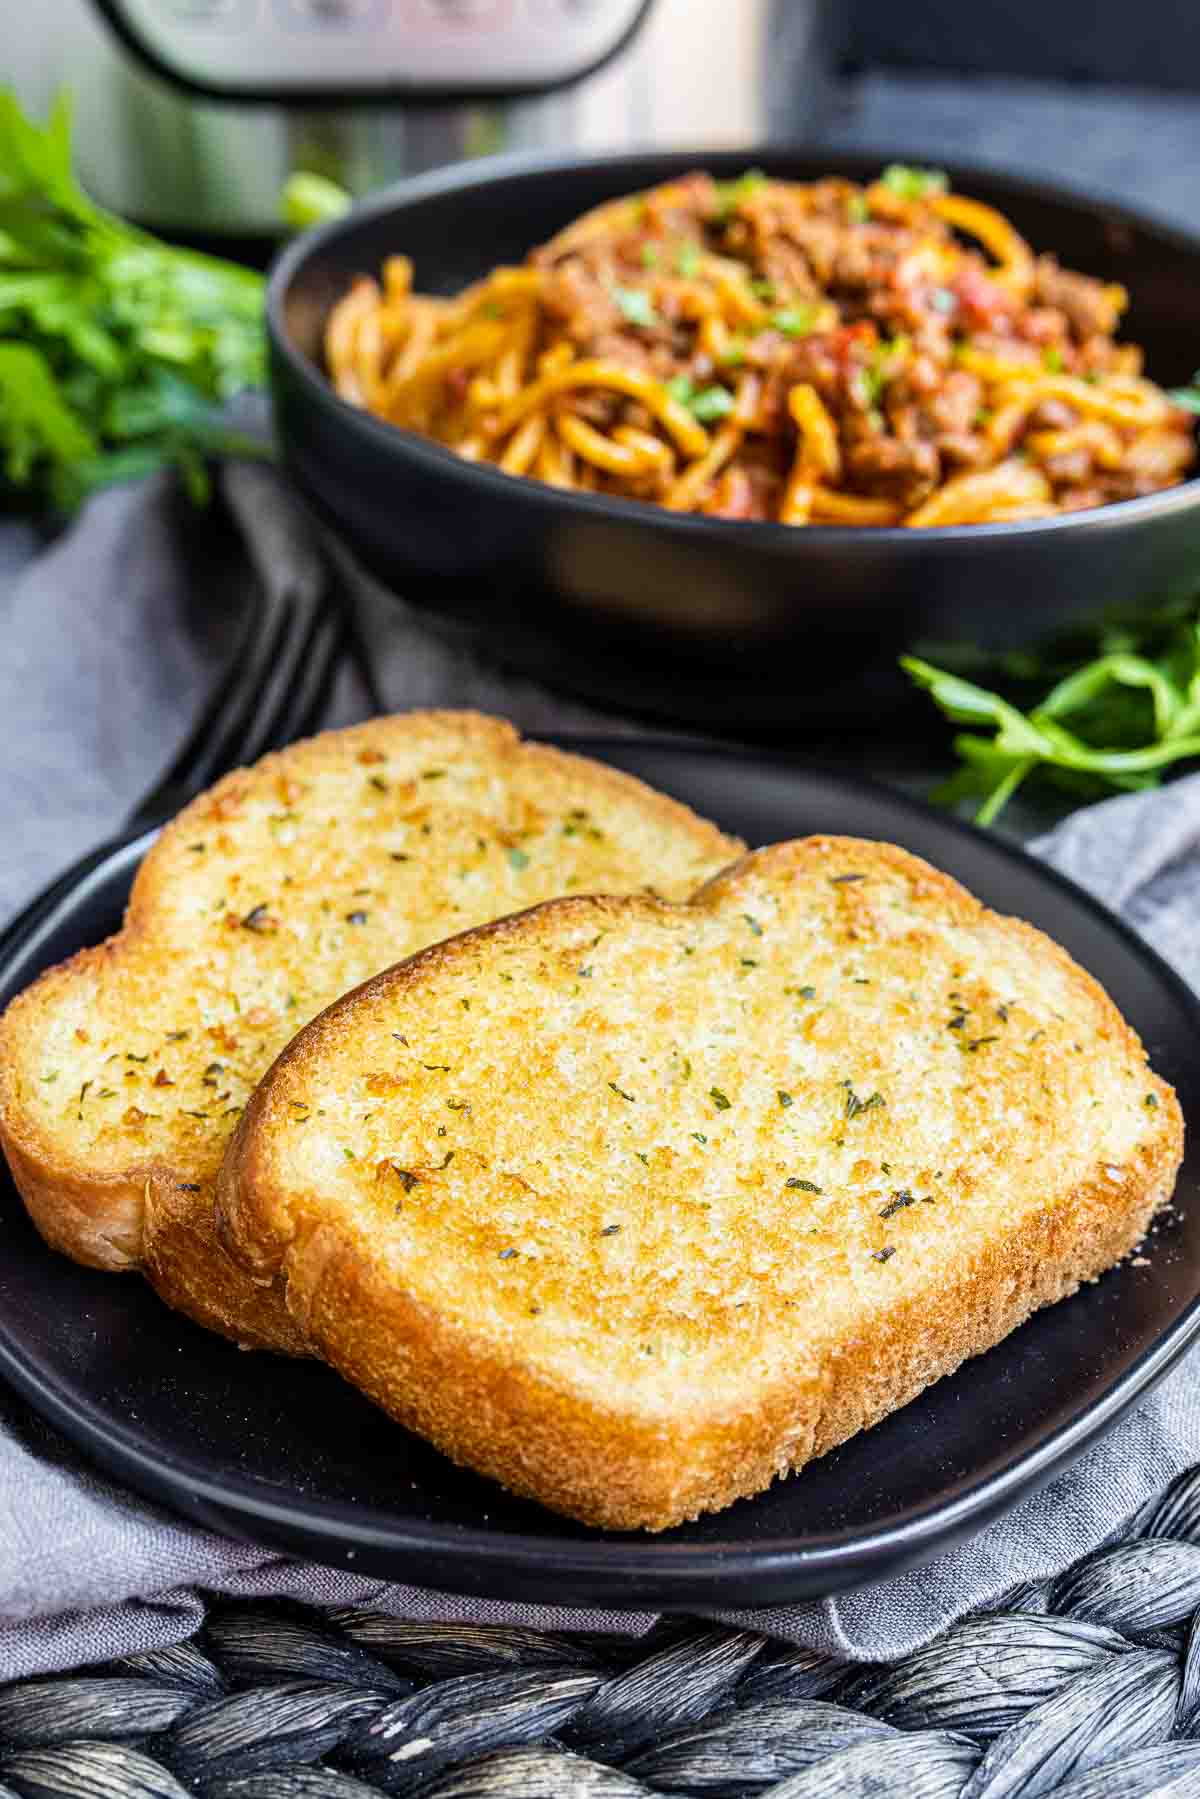 Texas Toast on a plate with spaghetti in a bowl